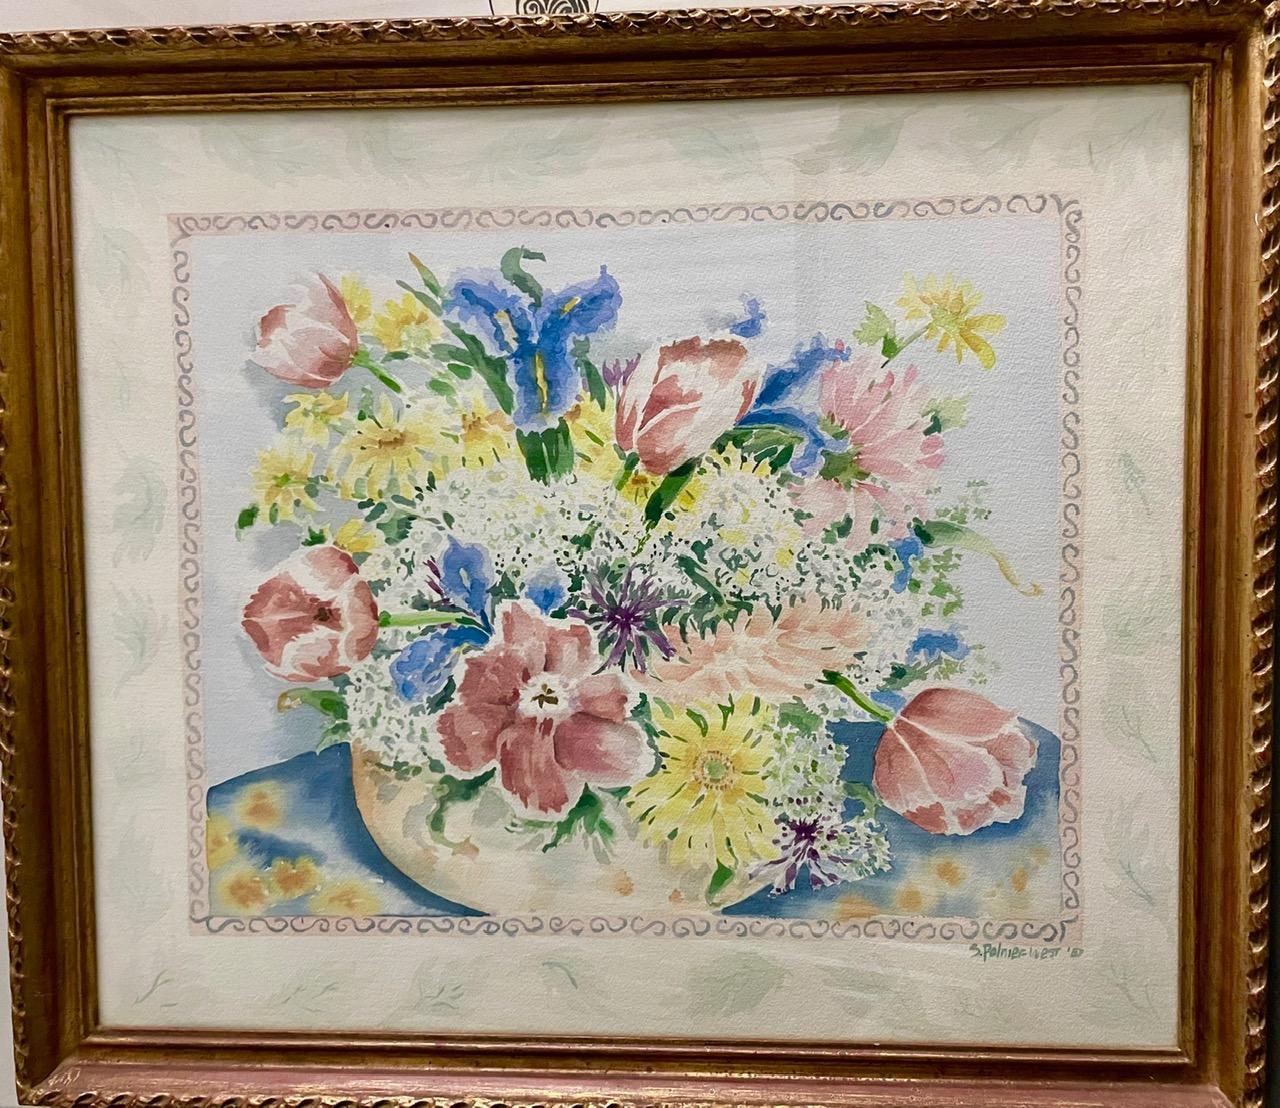 Flowers painted beautifully in watercolor by Susan Palmer would look nice in so many homes!
This painting is an original and signed by the artist with the frame included.
